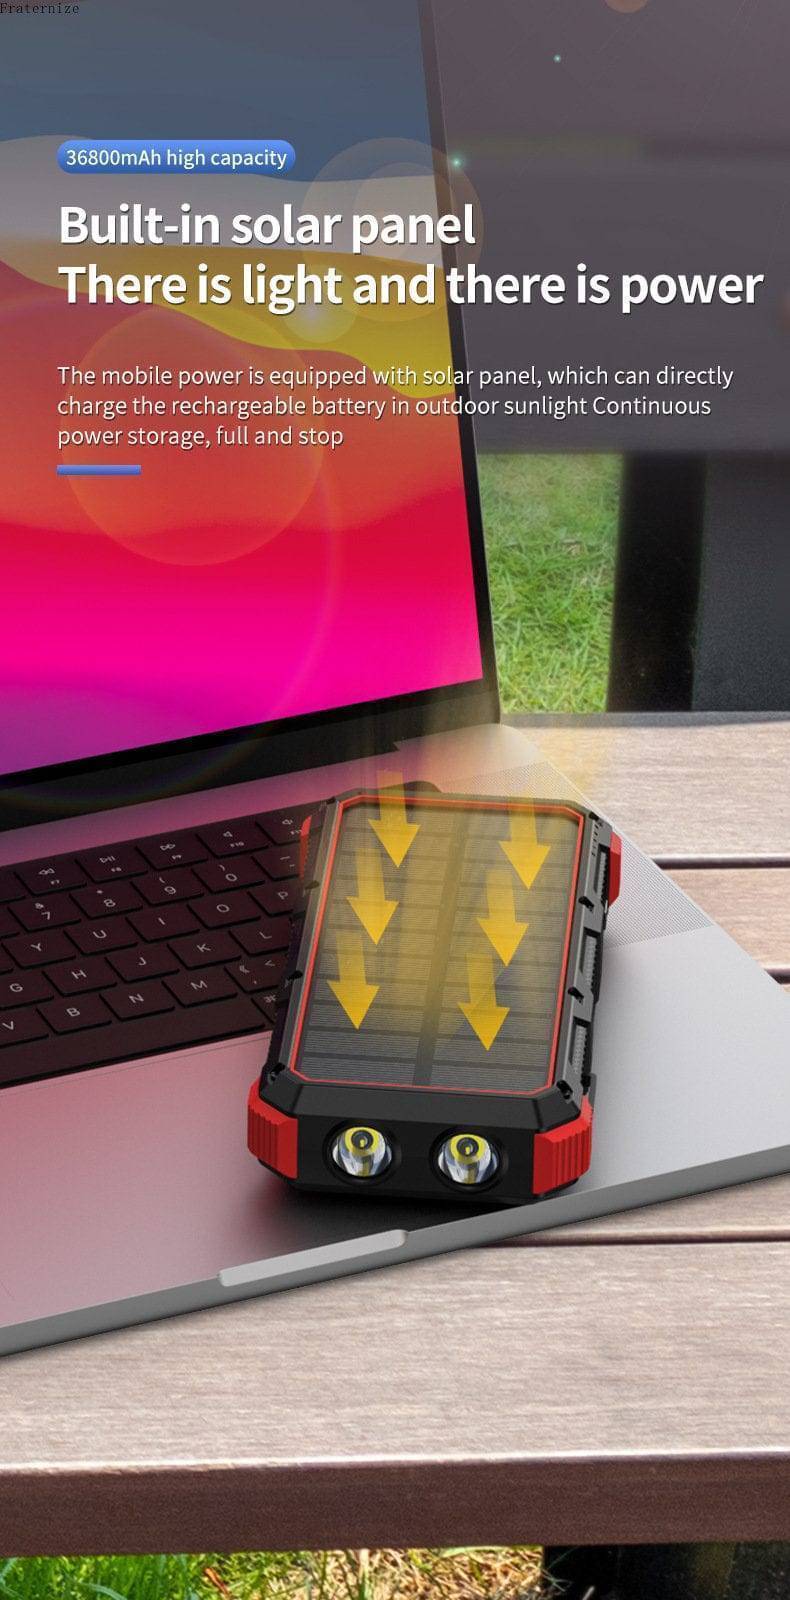 Efficient and Reliable 36800mAh Portable Wireless Quick Charger - Never Run Out of Power Again8